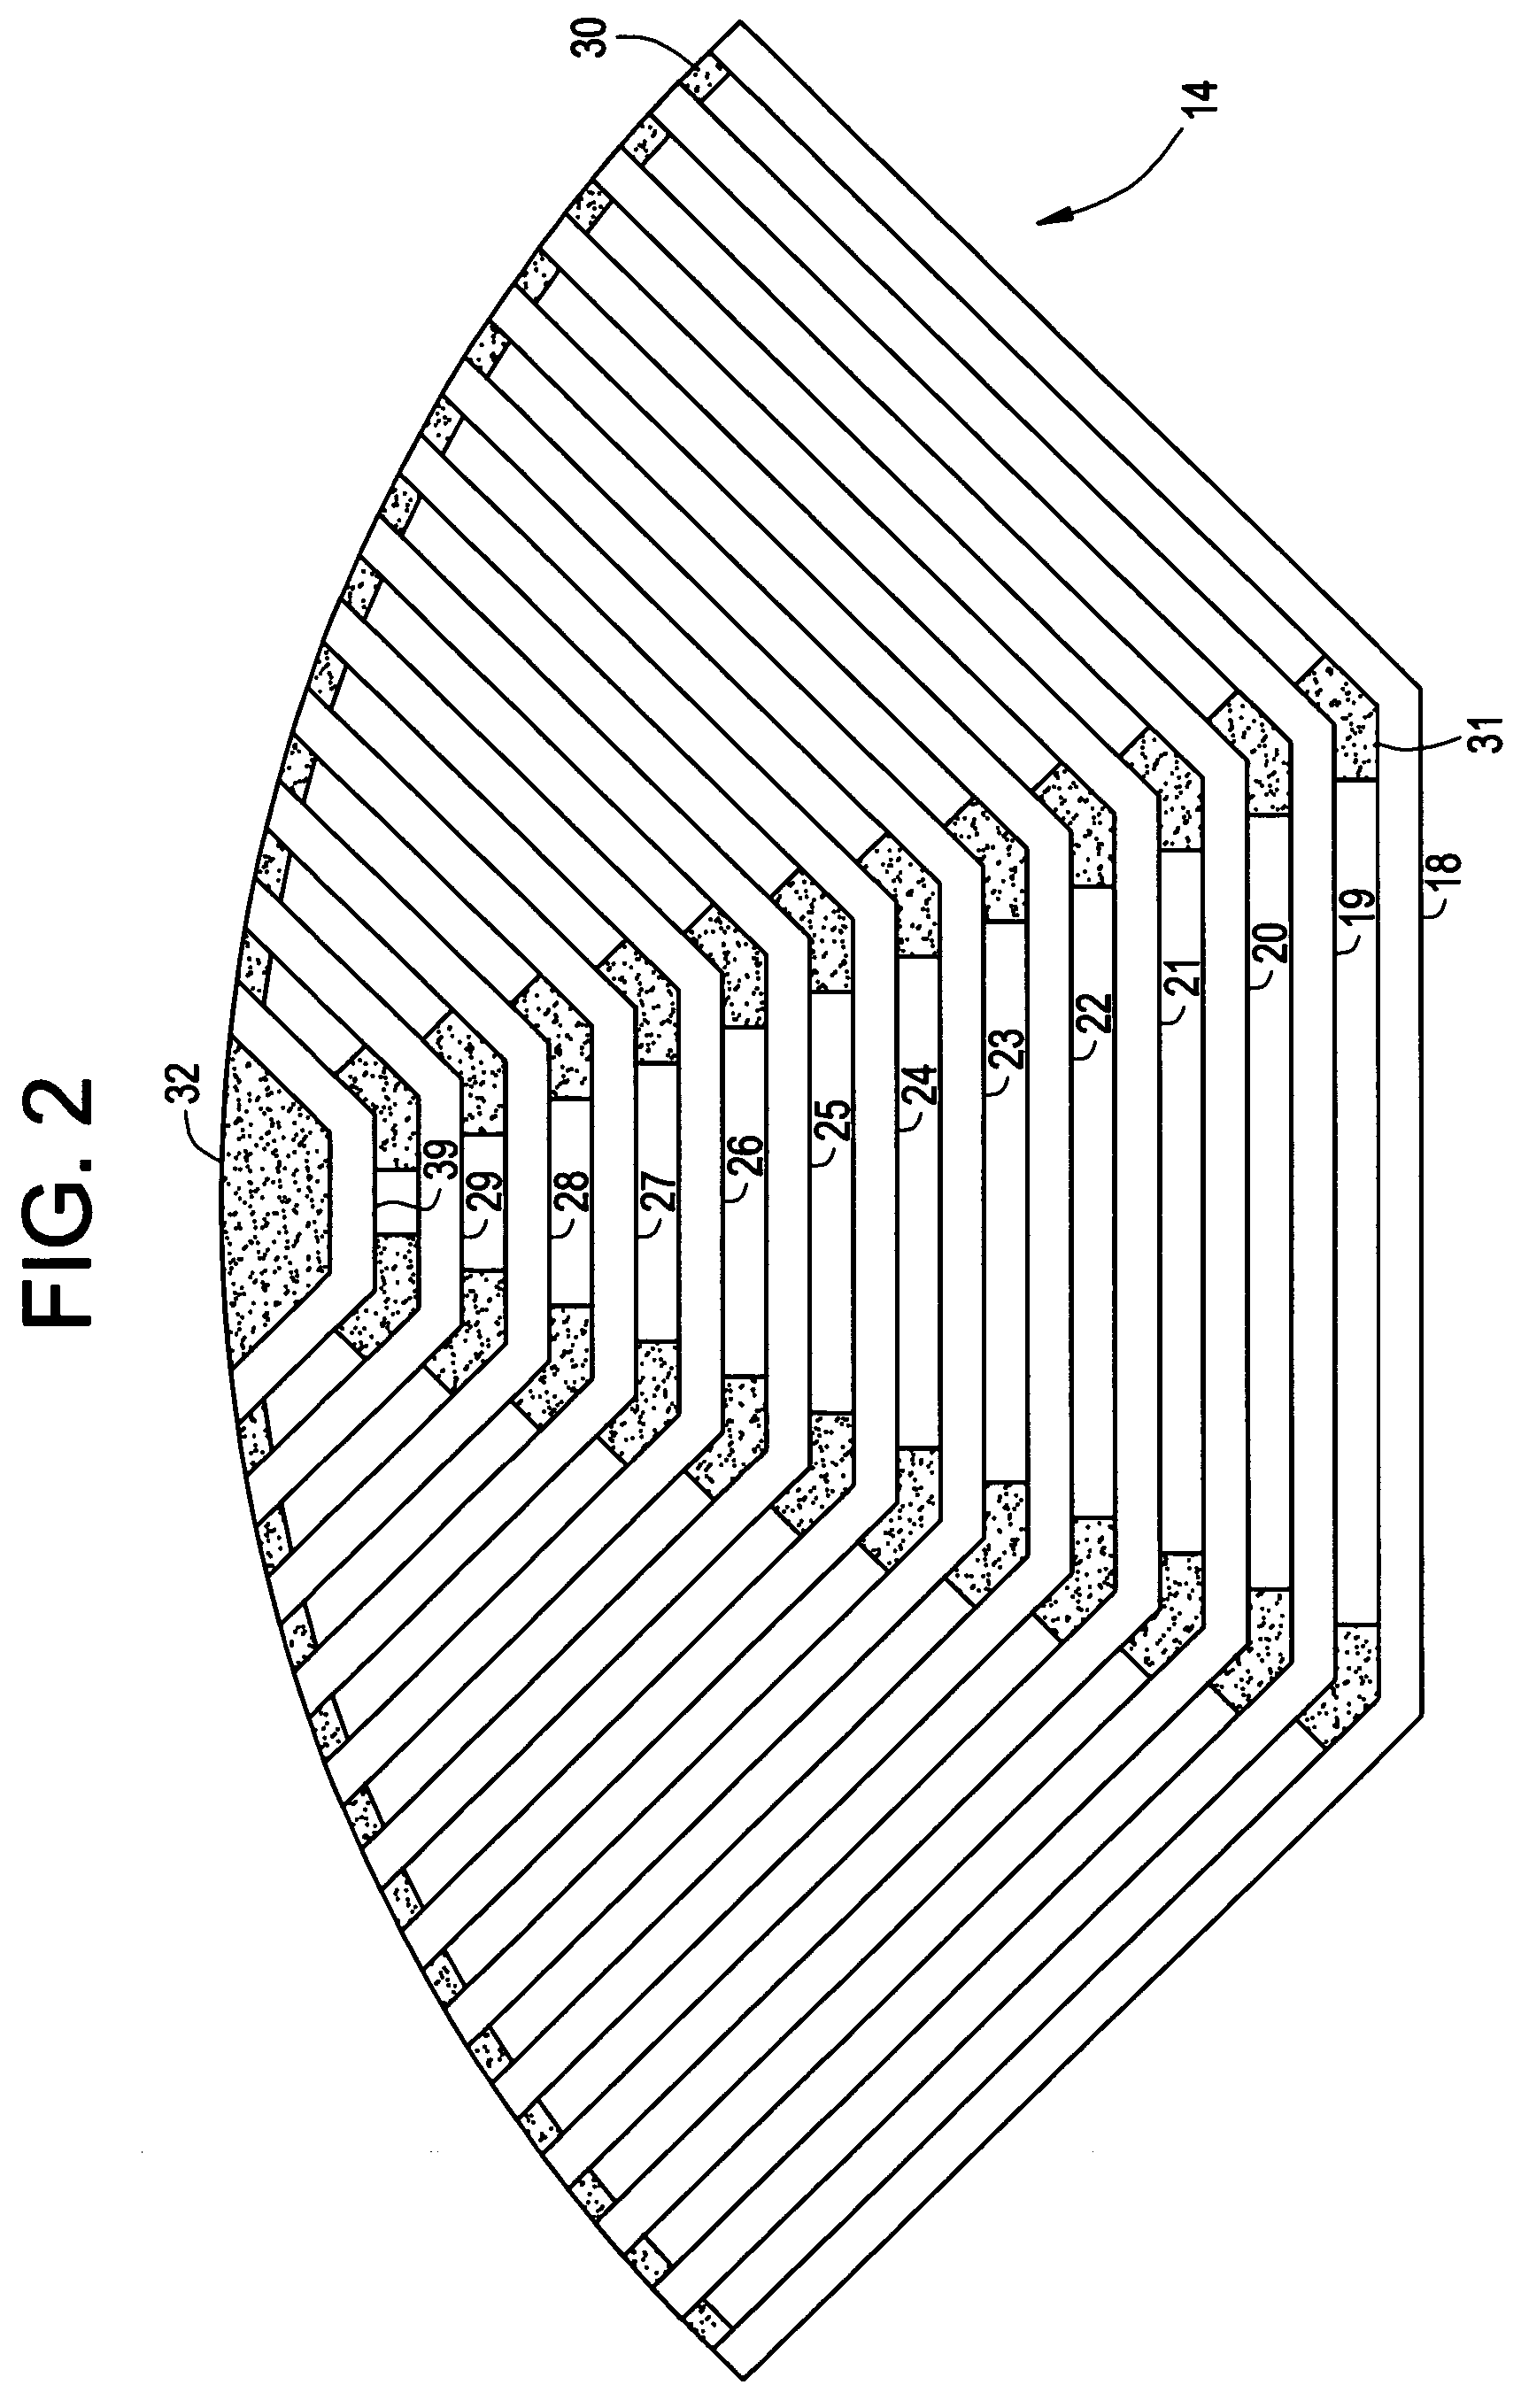 Synchronous reluctance machine with a novel rotor topology